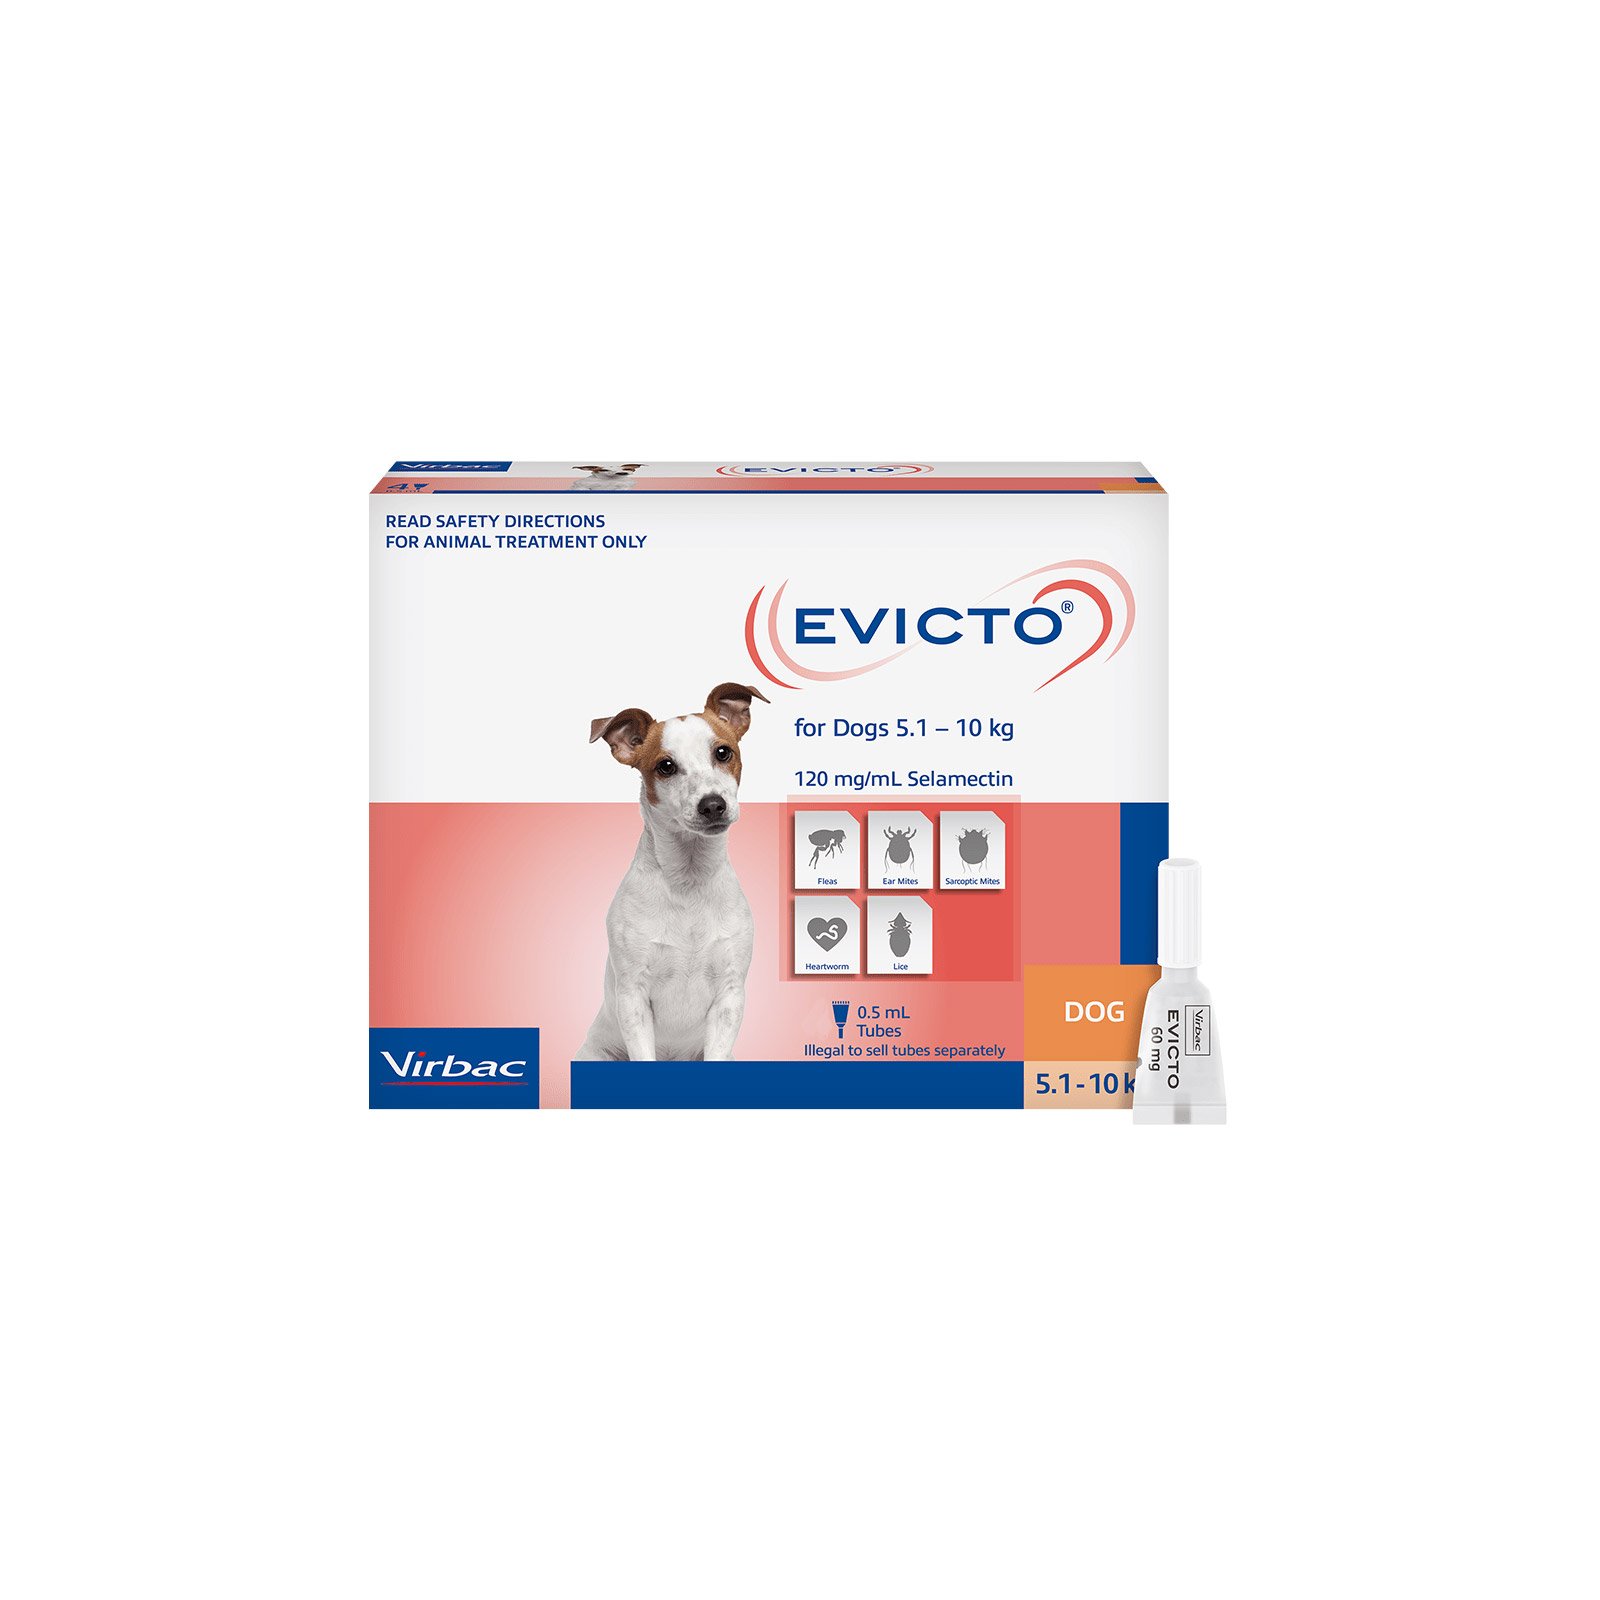 Evicto Spot-on FOR SMALL DOGS 5-10KG (ORANGE)